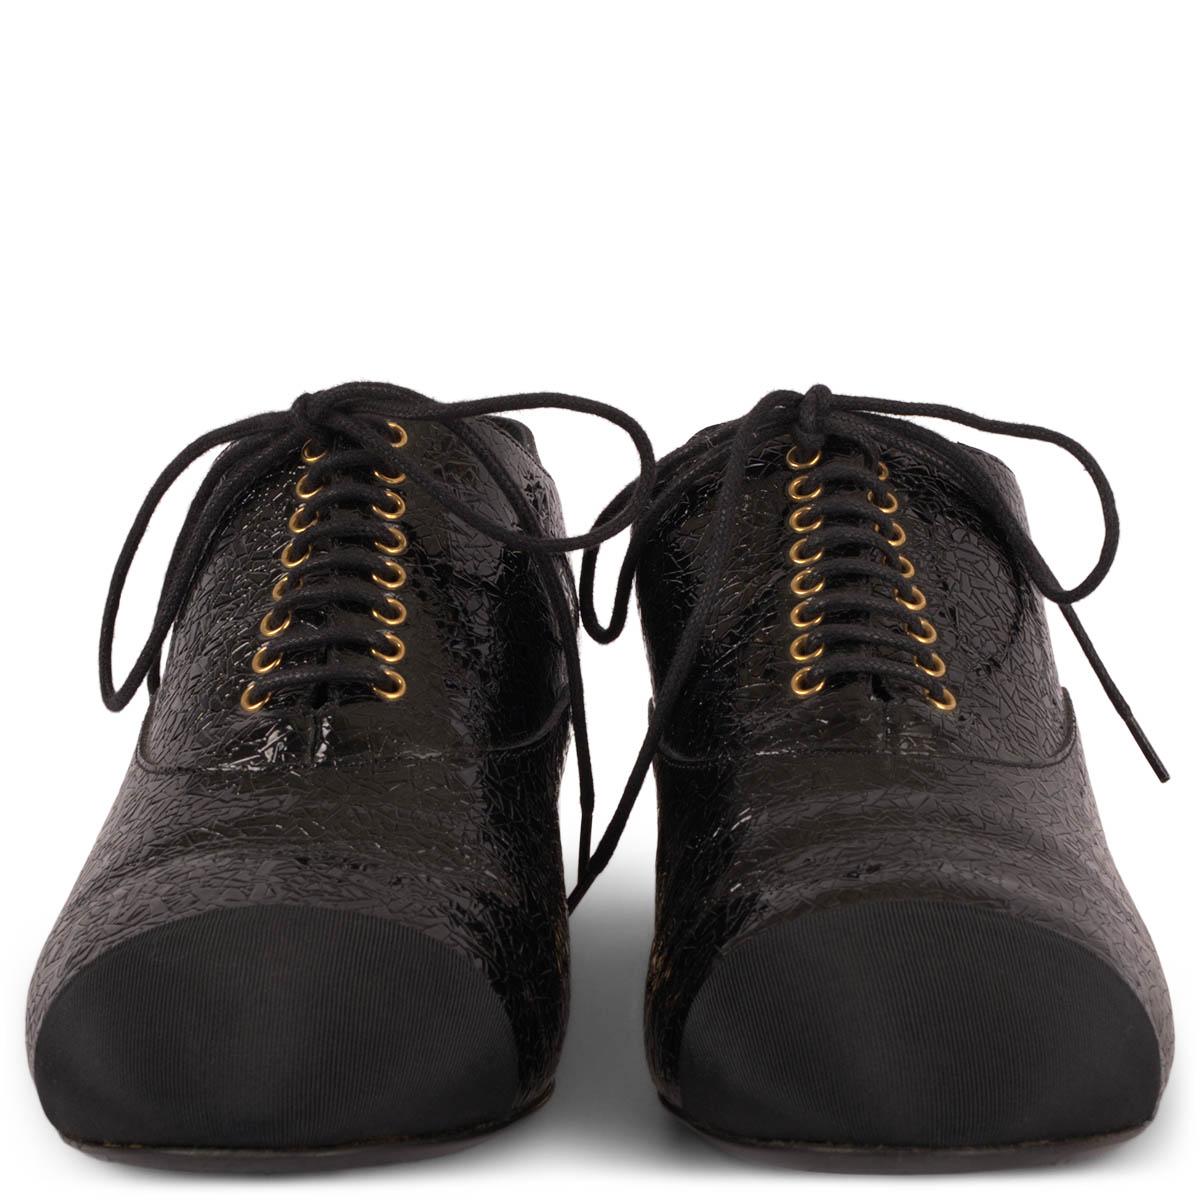 100% authentic Chanel lace-up oxford flats in black textured patent leather with grosgrain cap toe. Features gold-tone eyelets and heel trim with faux pearl. Have been worn and are in excellent condition. Come with dust bag.

2017 Paris-Cuba